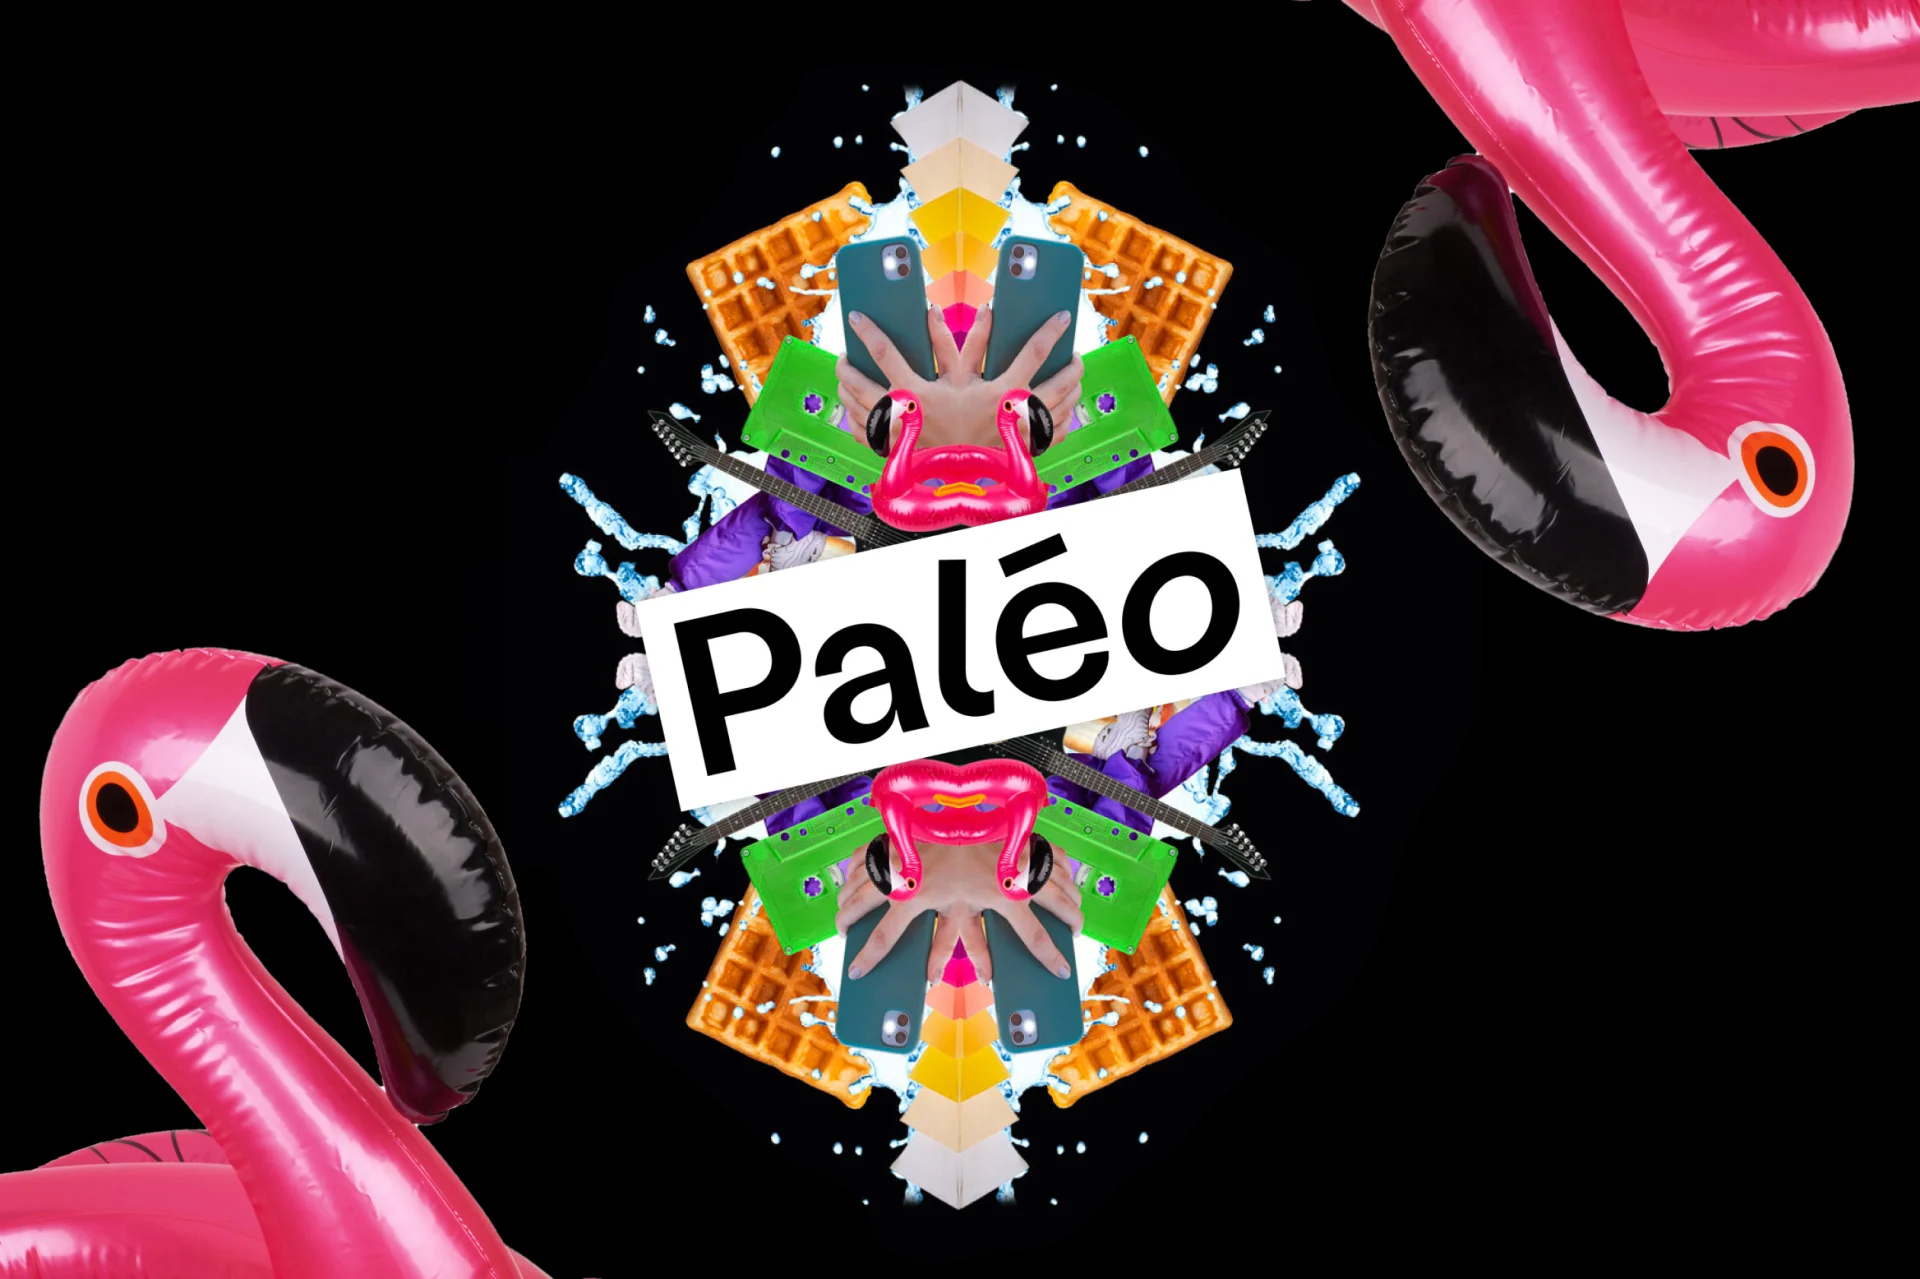 Collage for the Paléo Festival